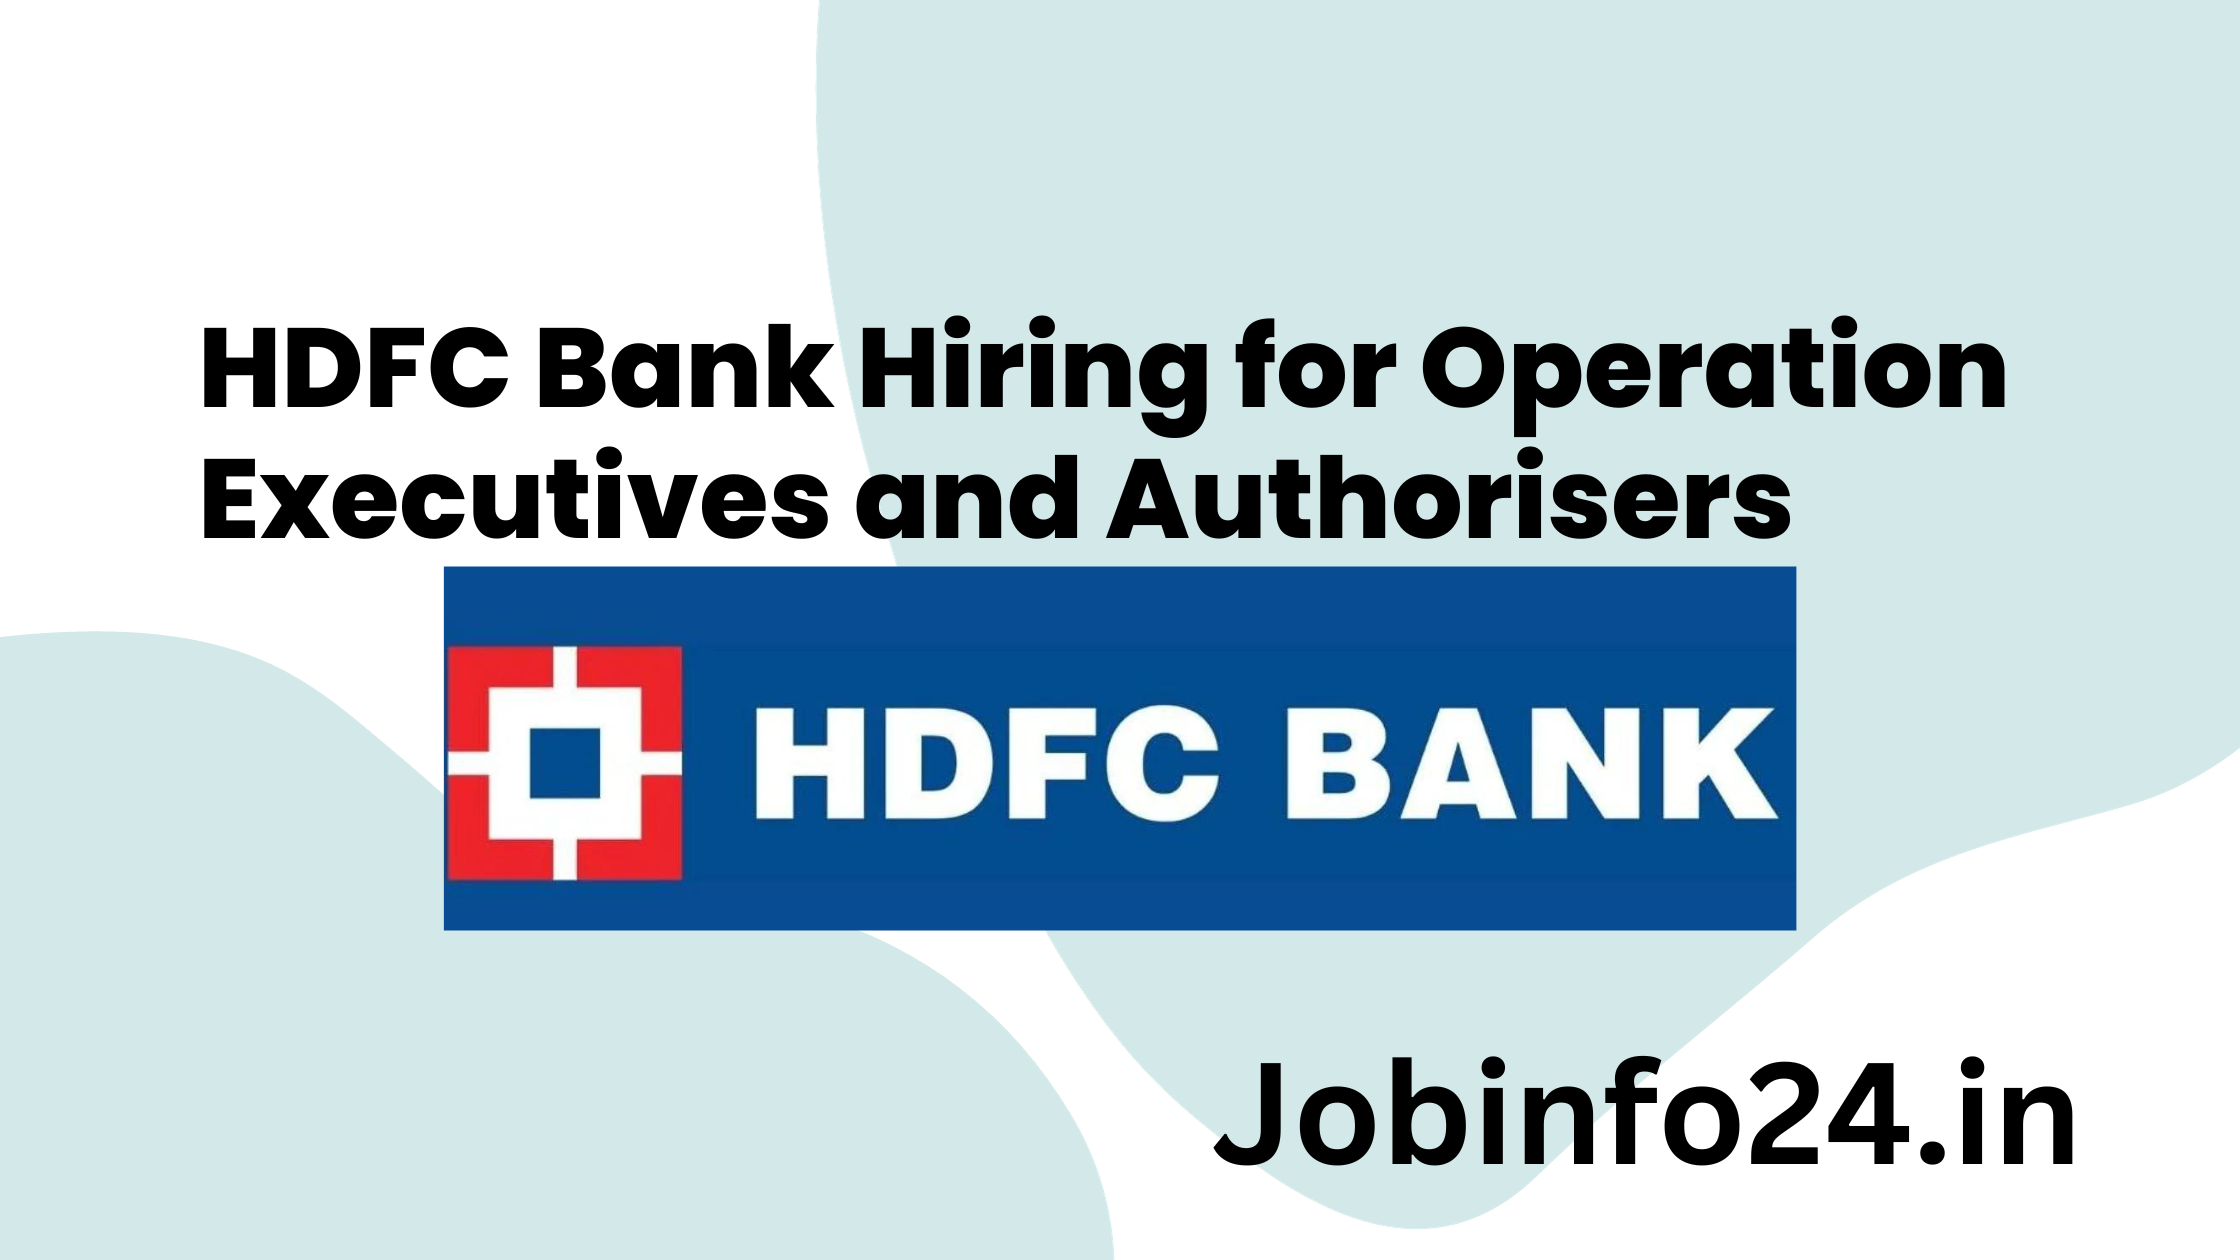 HDFC Bank Hiring for Operation Executives and Authorisers